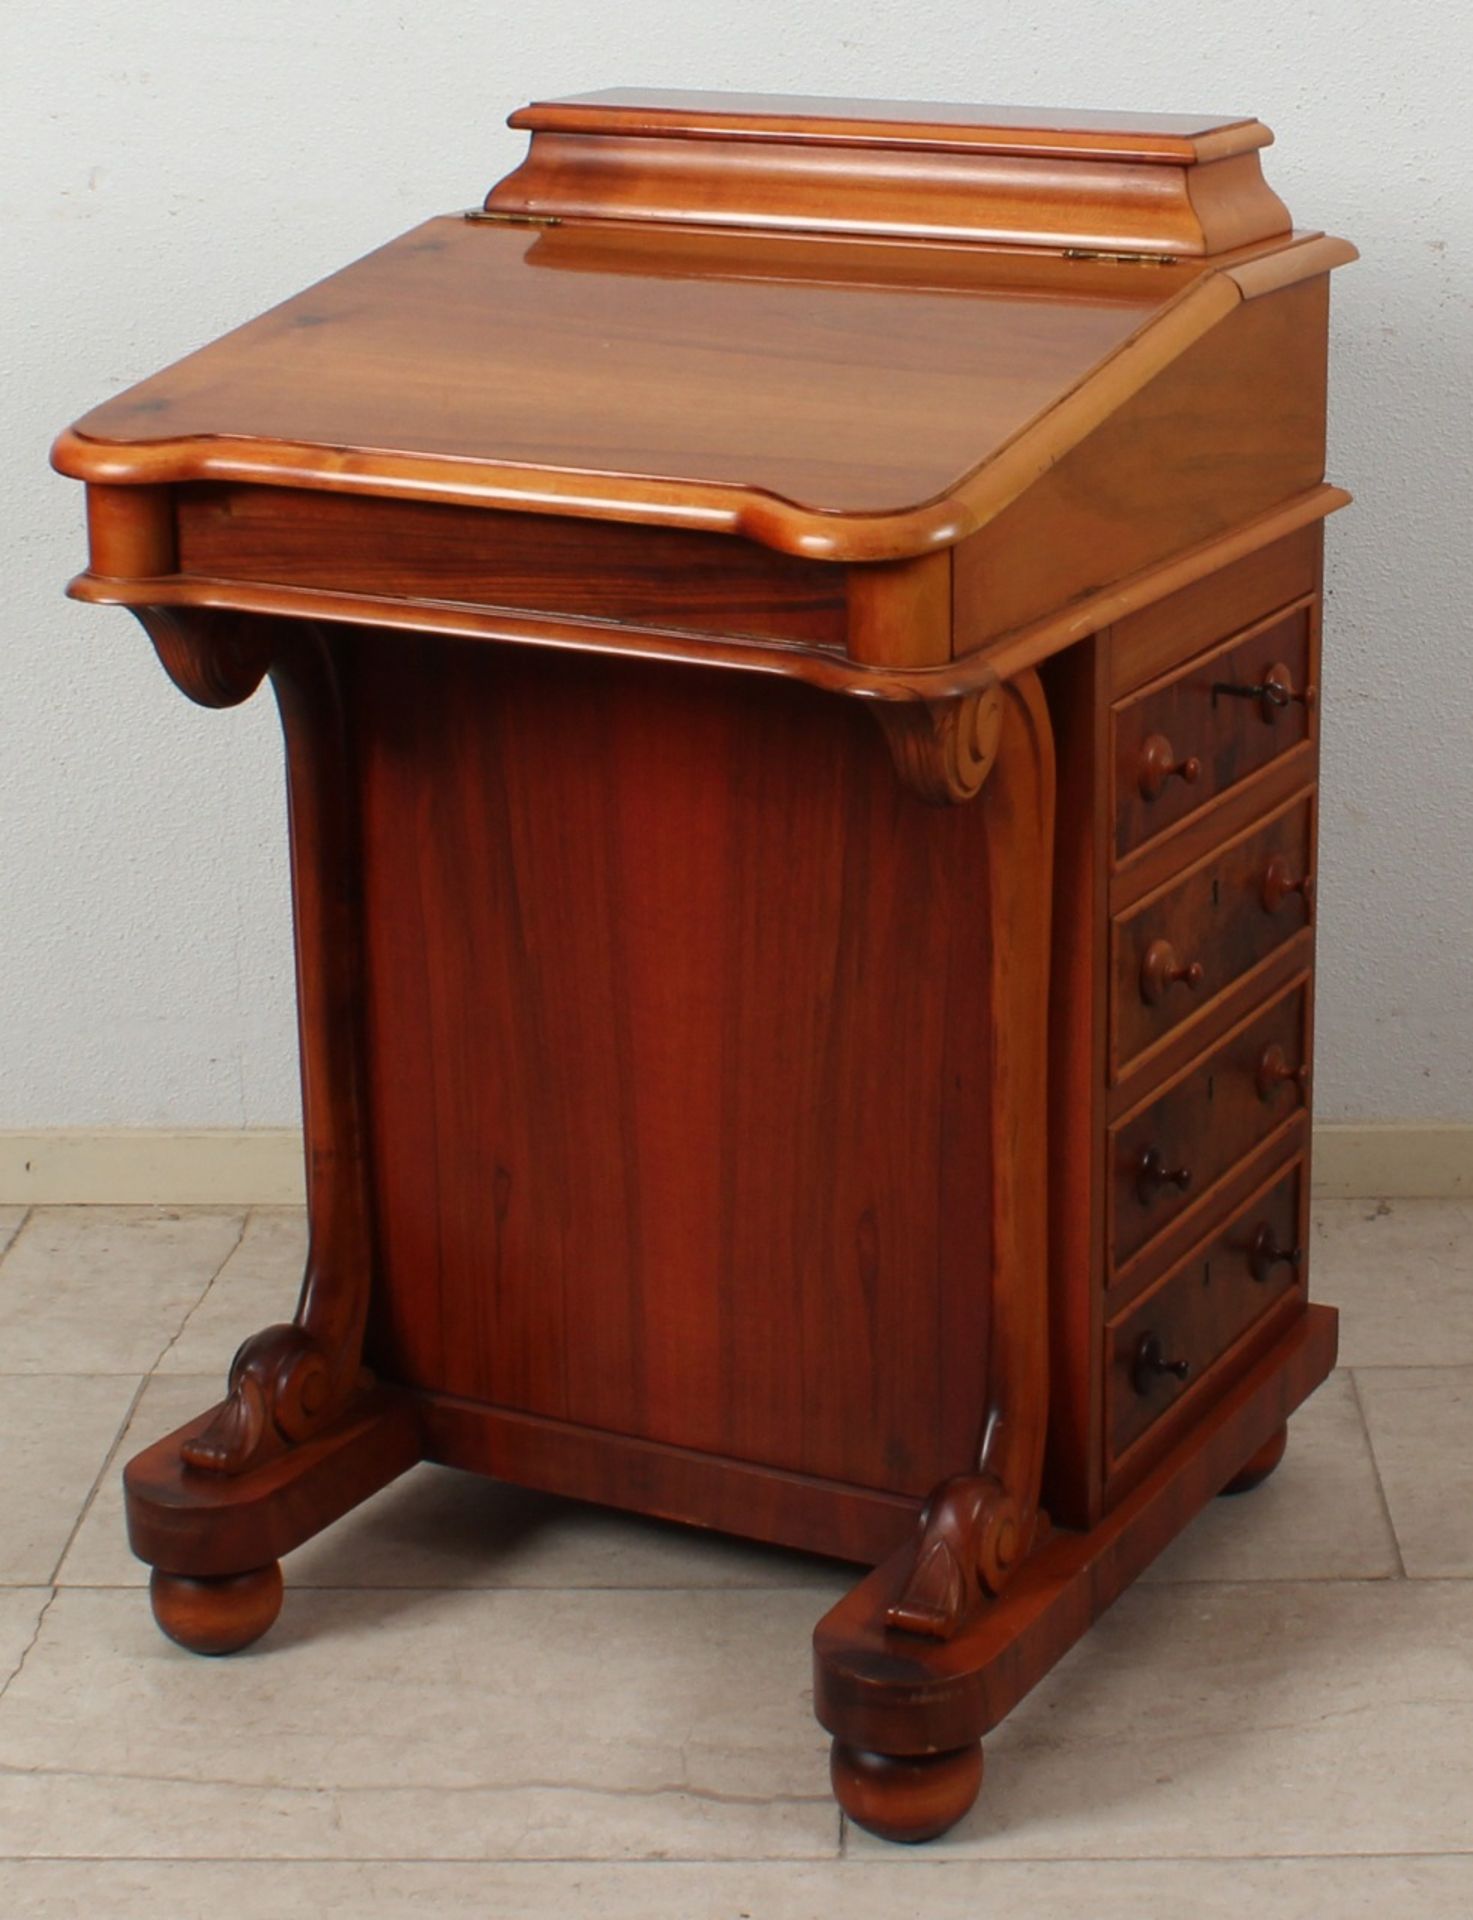 English mahogany Davenport writing desk with drawers side, 20th century 87x55x53cm. Cond: G Englisch